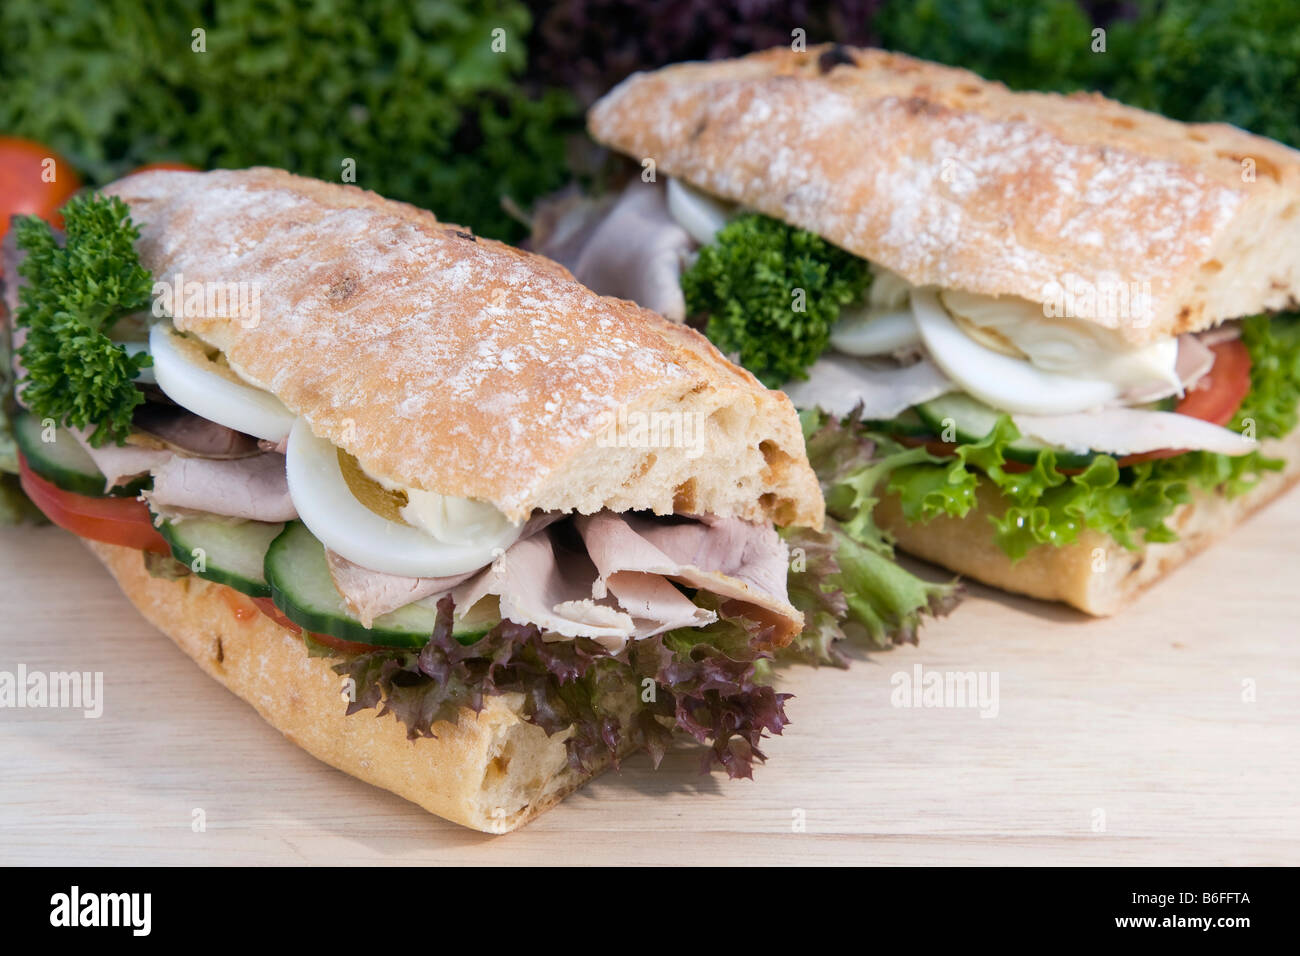 Onion baguette with salad, tomatoes, cucumber, roast pork, egg and mayonnaise Stock Photo